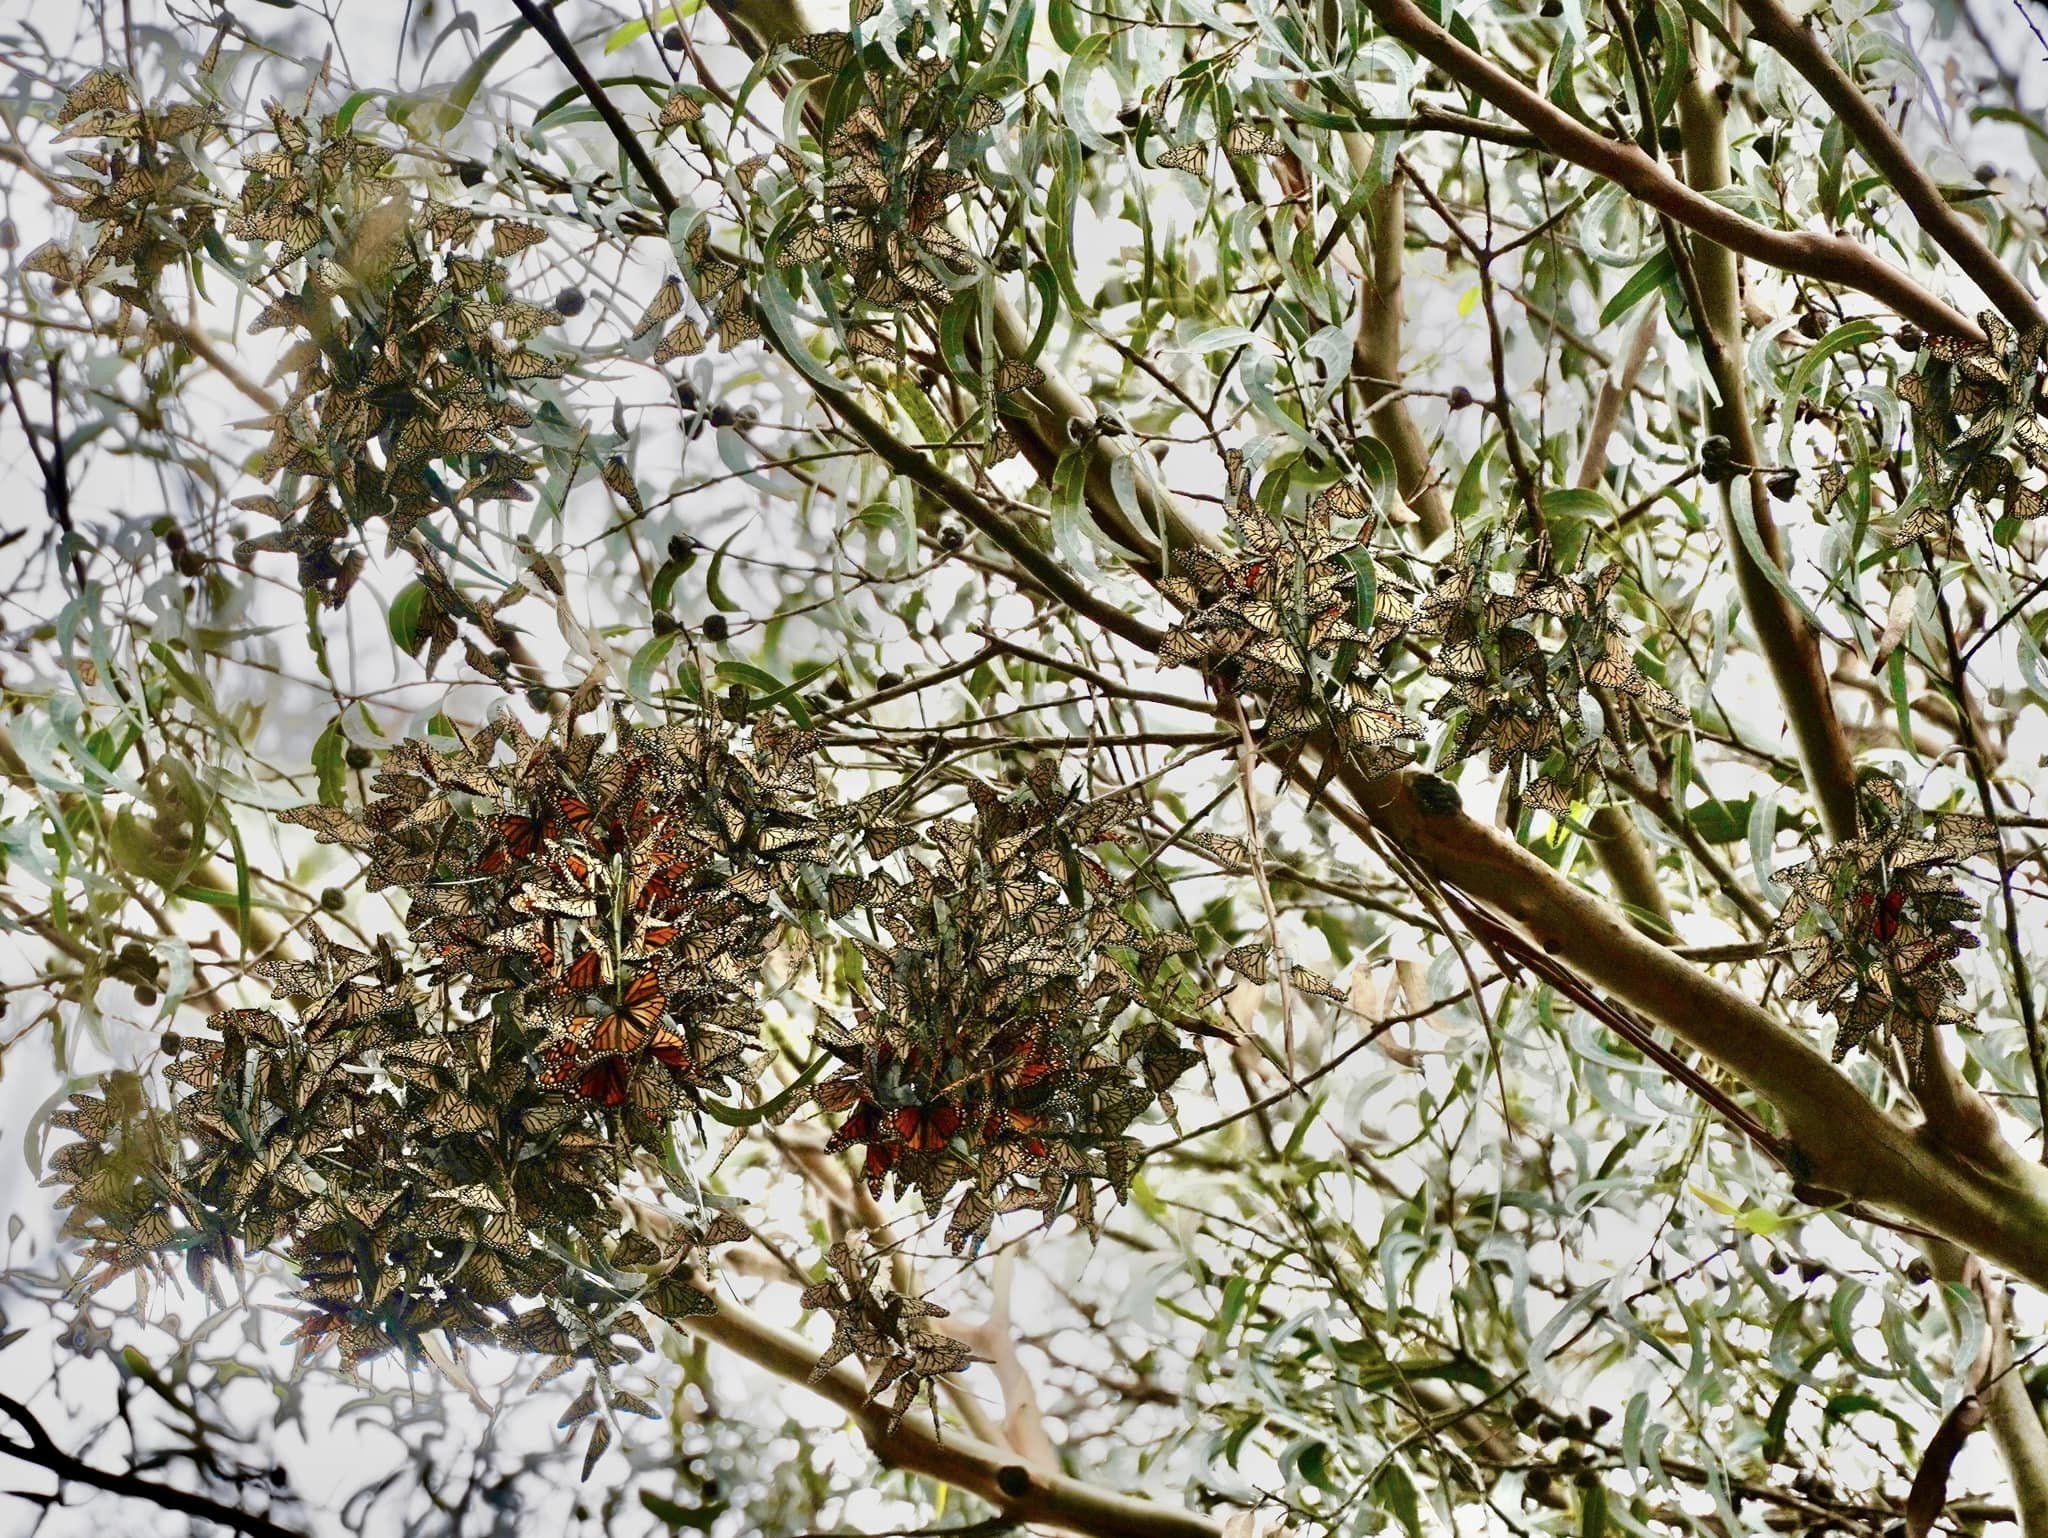 Clumps of monarch butterflies gather in a tree.